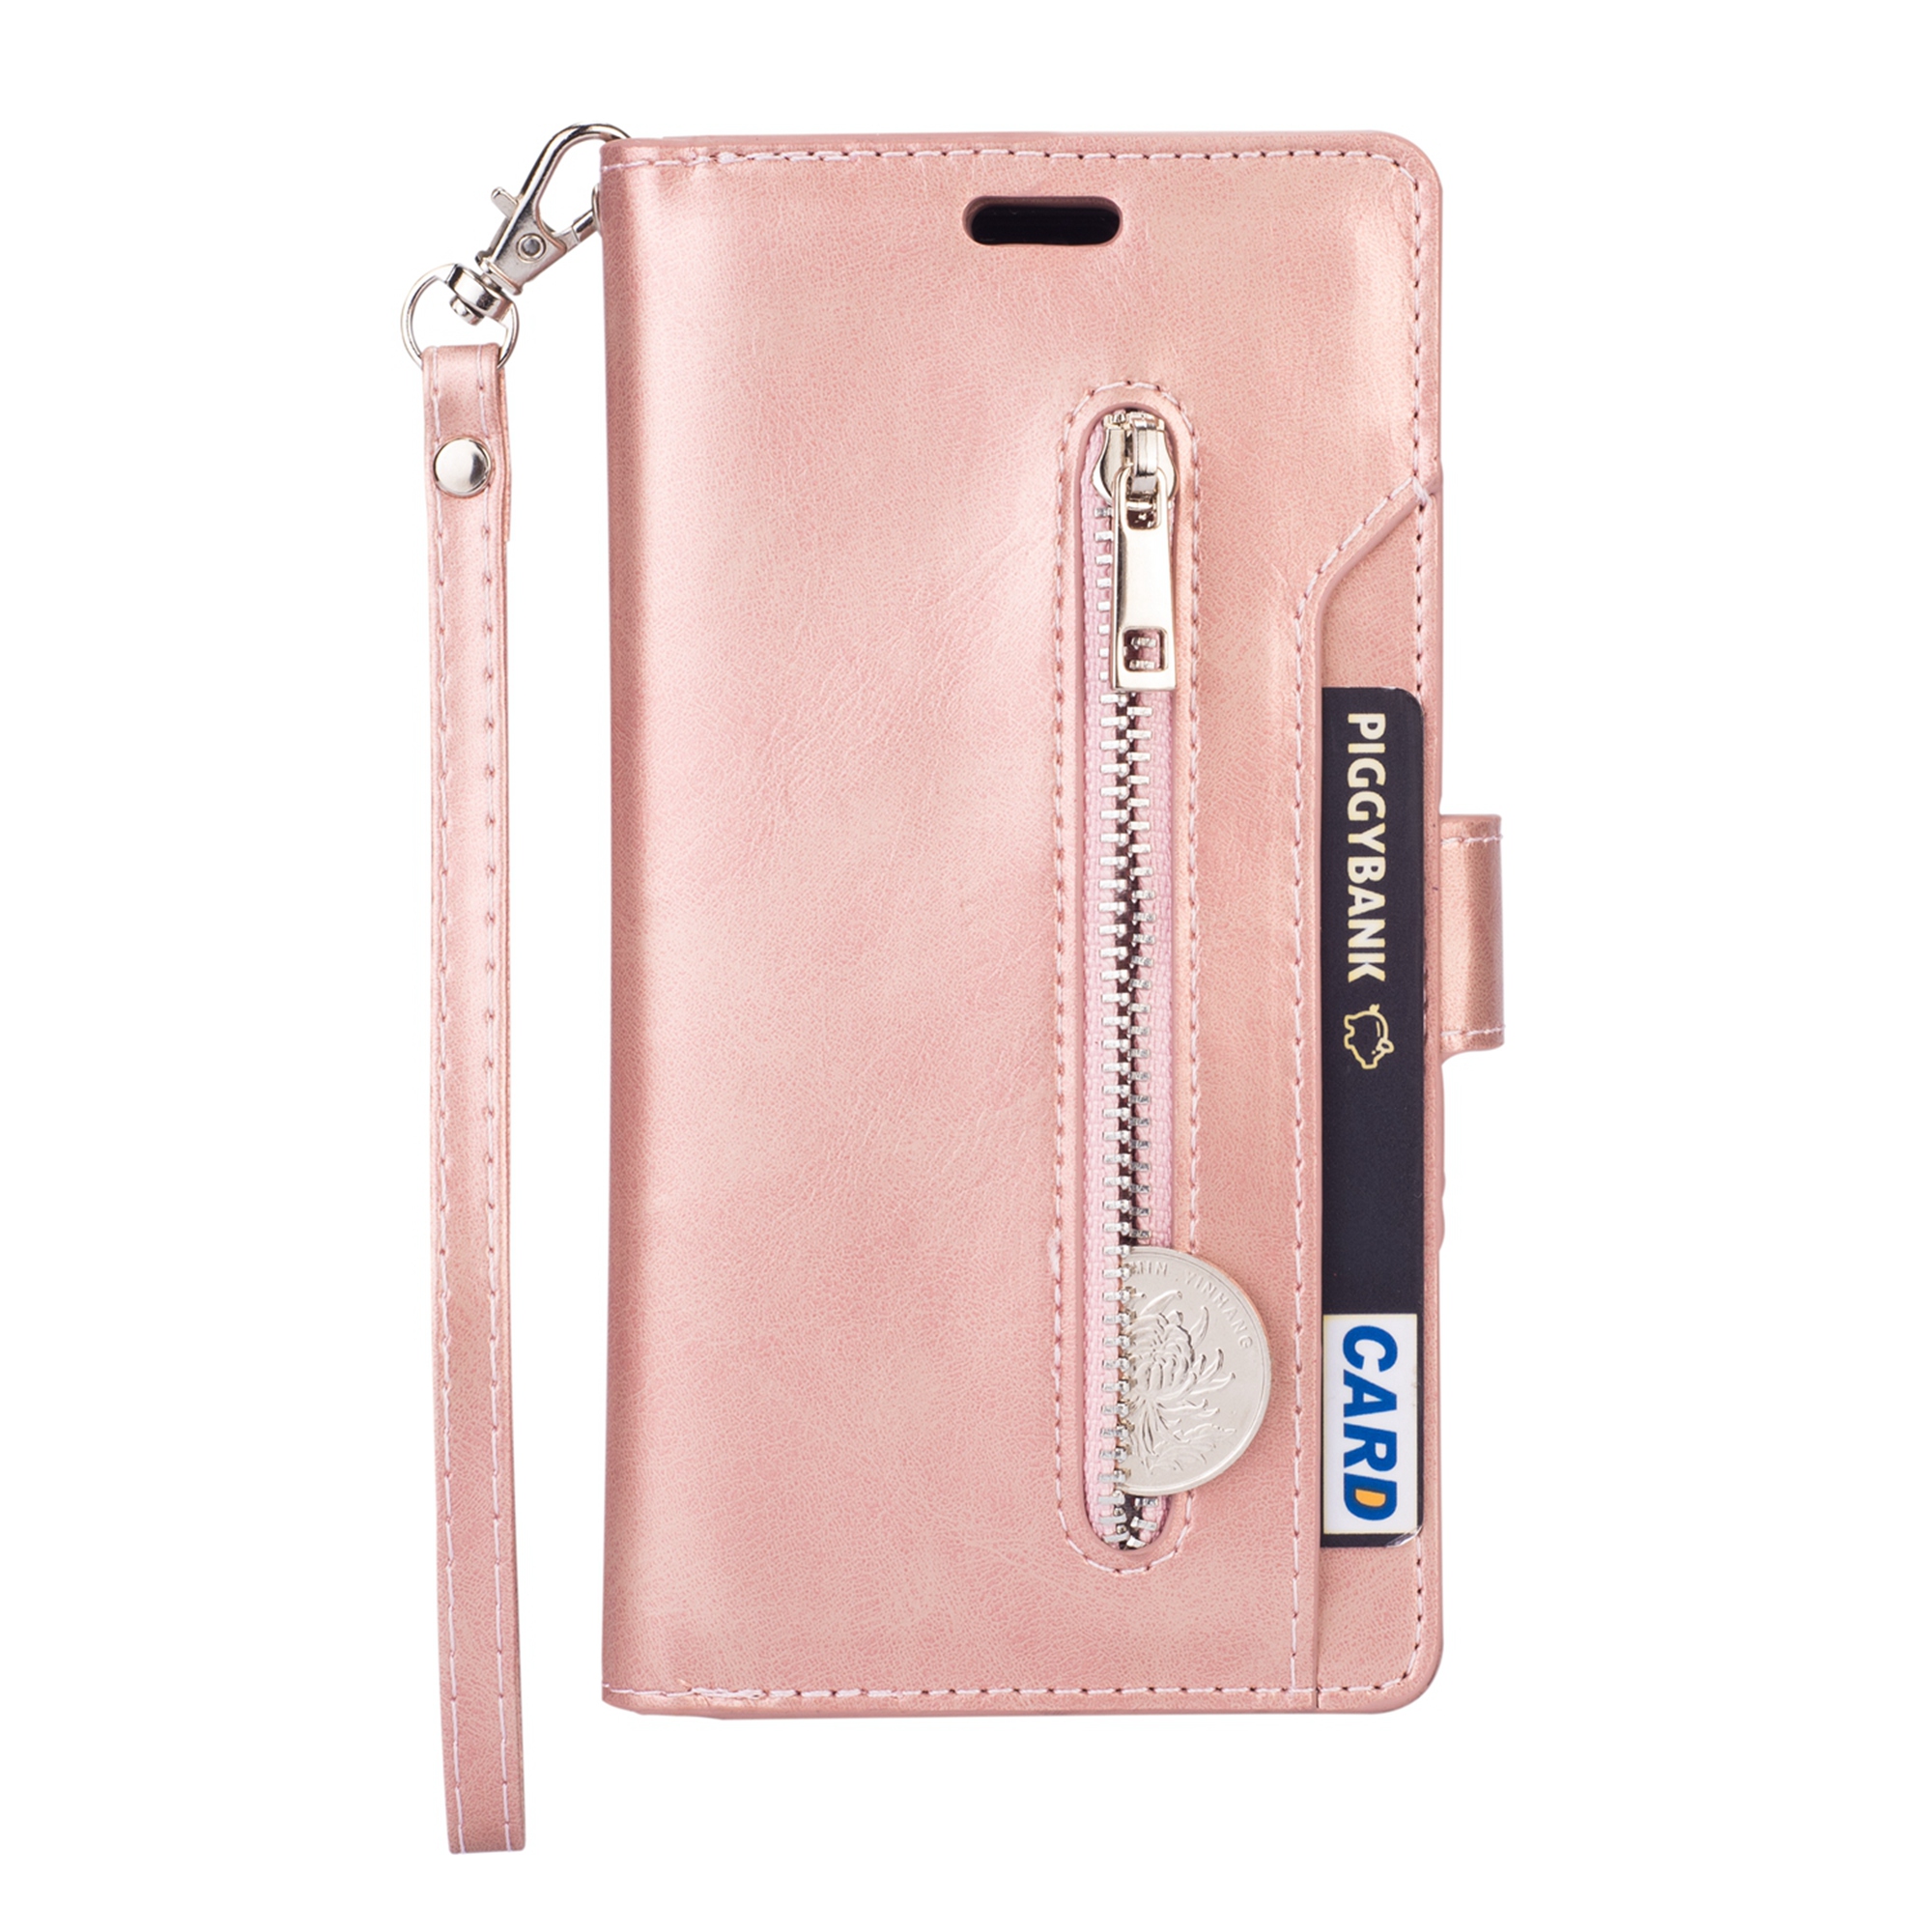 iPhone 11 6.1 inch Wallet Case, Dteck 9 Card Slots Premium Leather Zipper Purse case Flip Kickstand Folio Magnetic with Wrist Strap Credit Cash Cover For Apple iPhone 11, Rosegold - image 3 of 7